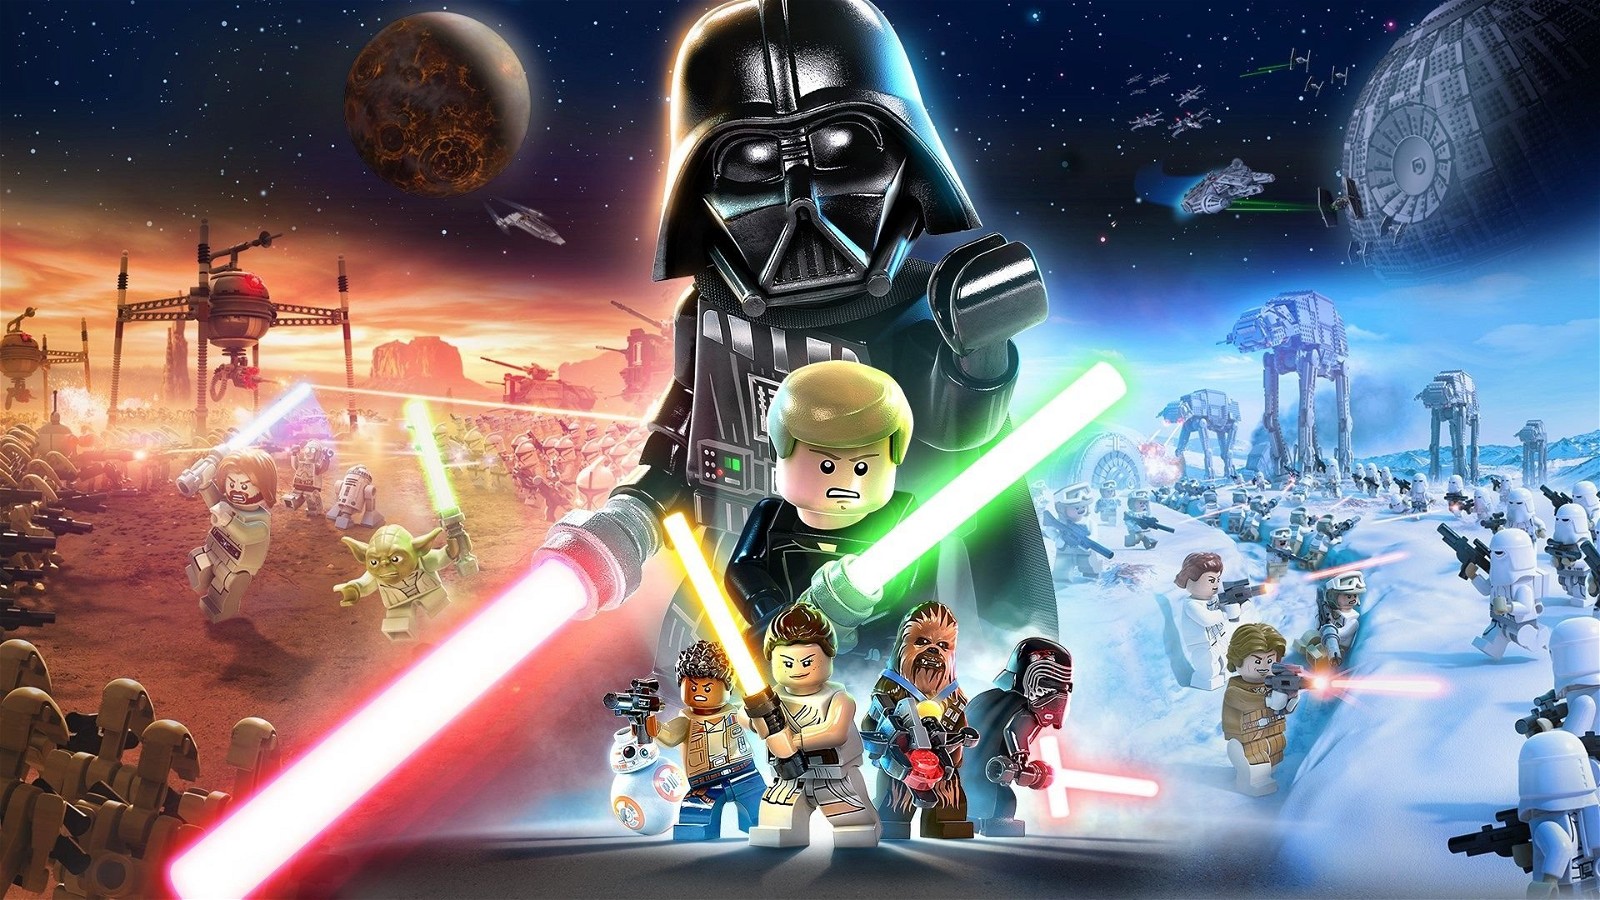 You Can Once Again Duplicate Characters in LEGO Star Wars: The Skywalker Saga